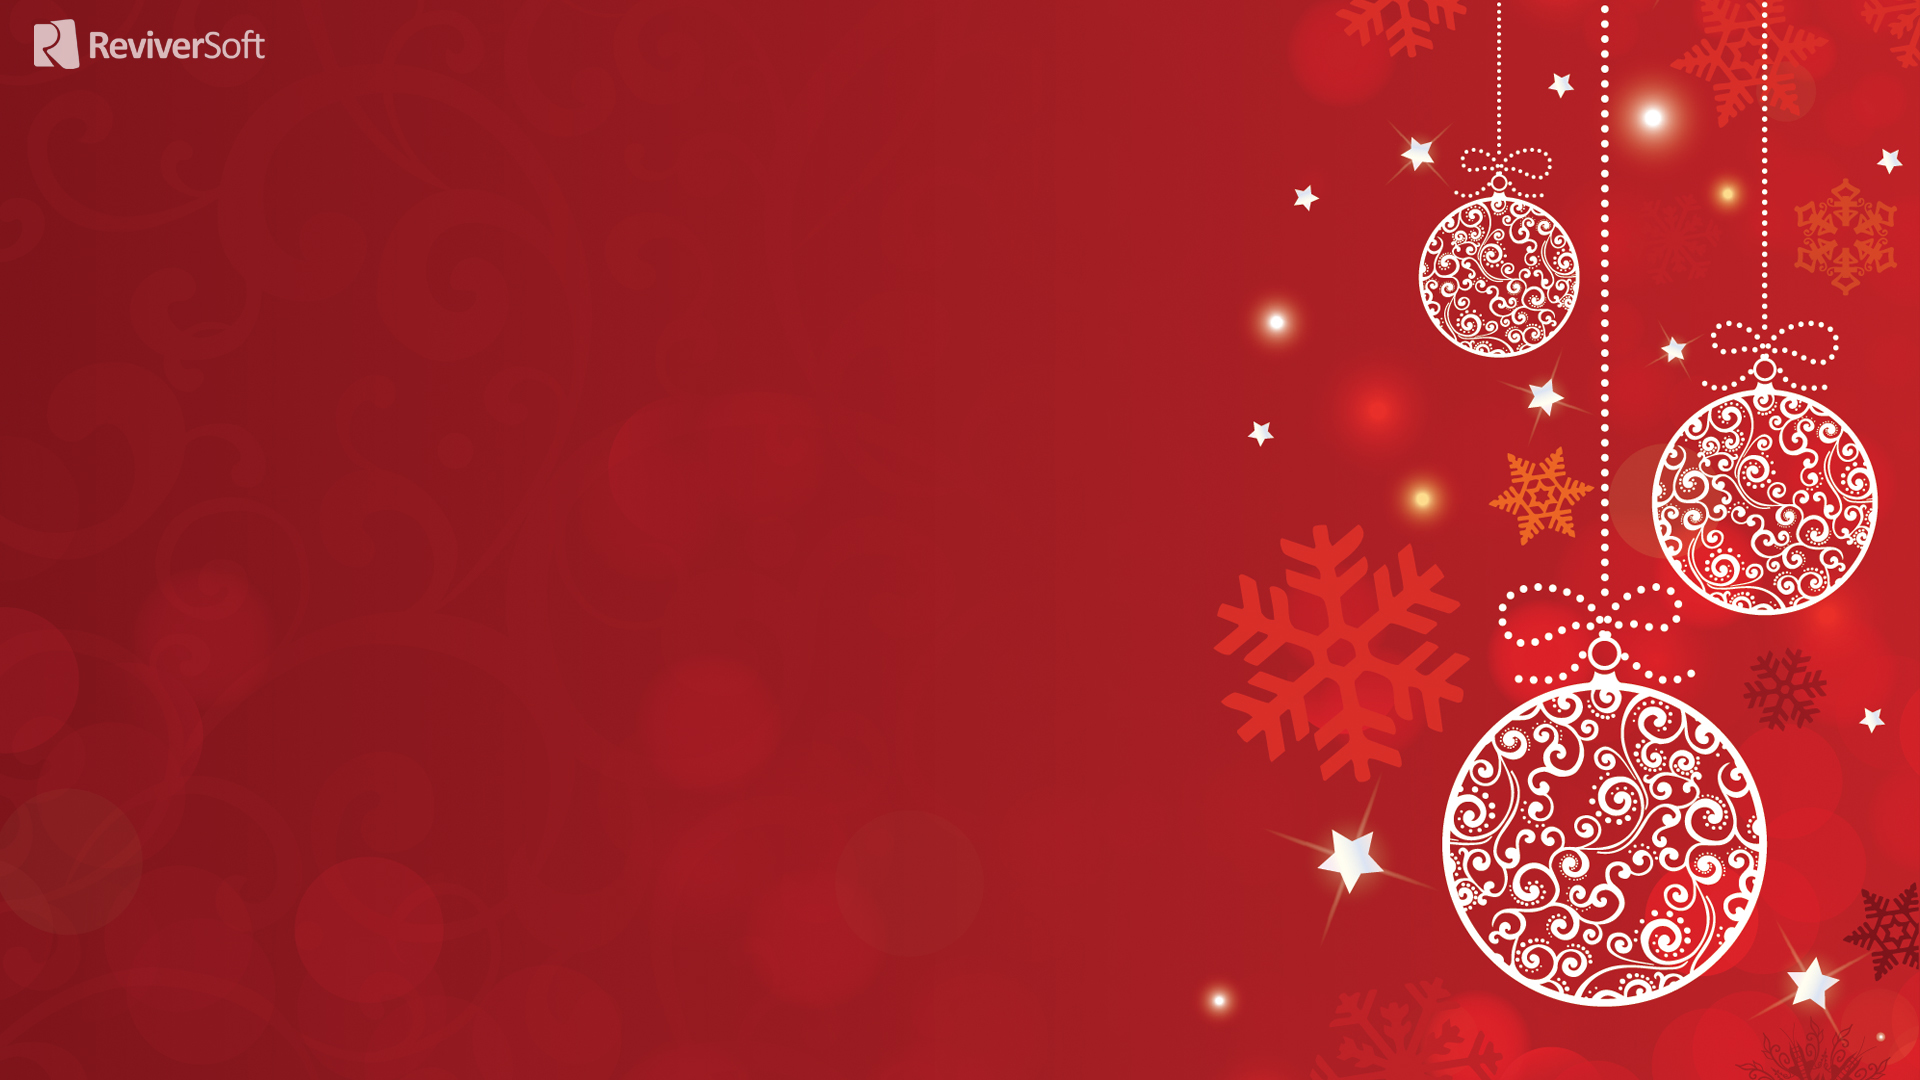 Red Christmas Wallpaper Christmas_wallpapers_White_Christmas_decorations_on_a_red_background .